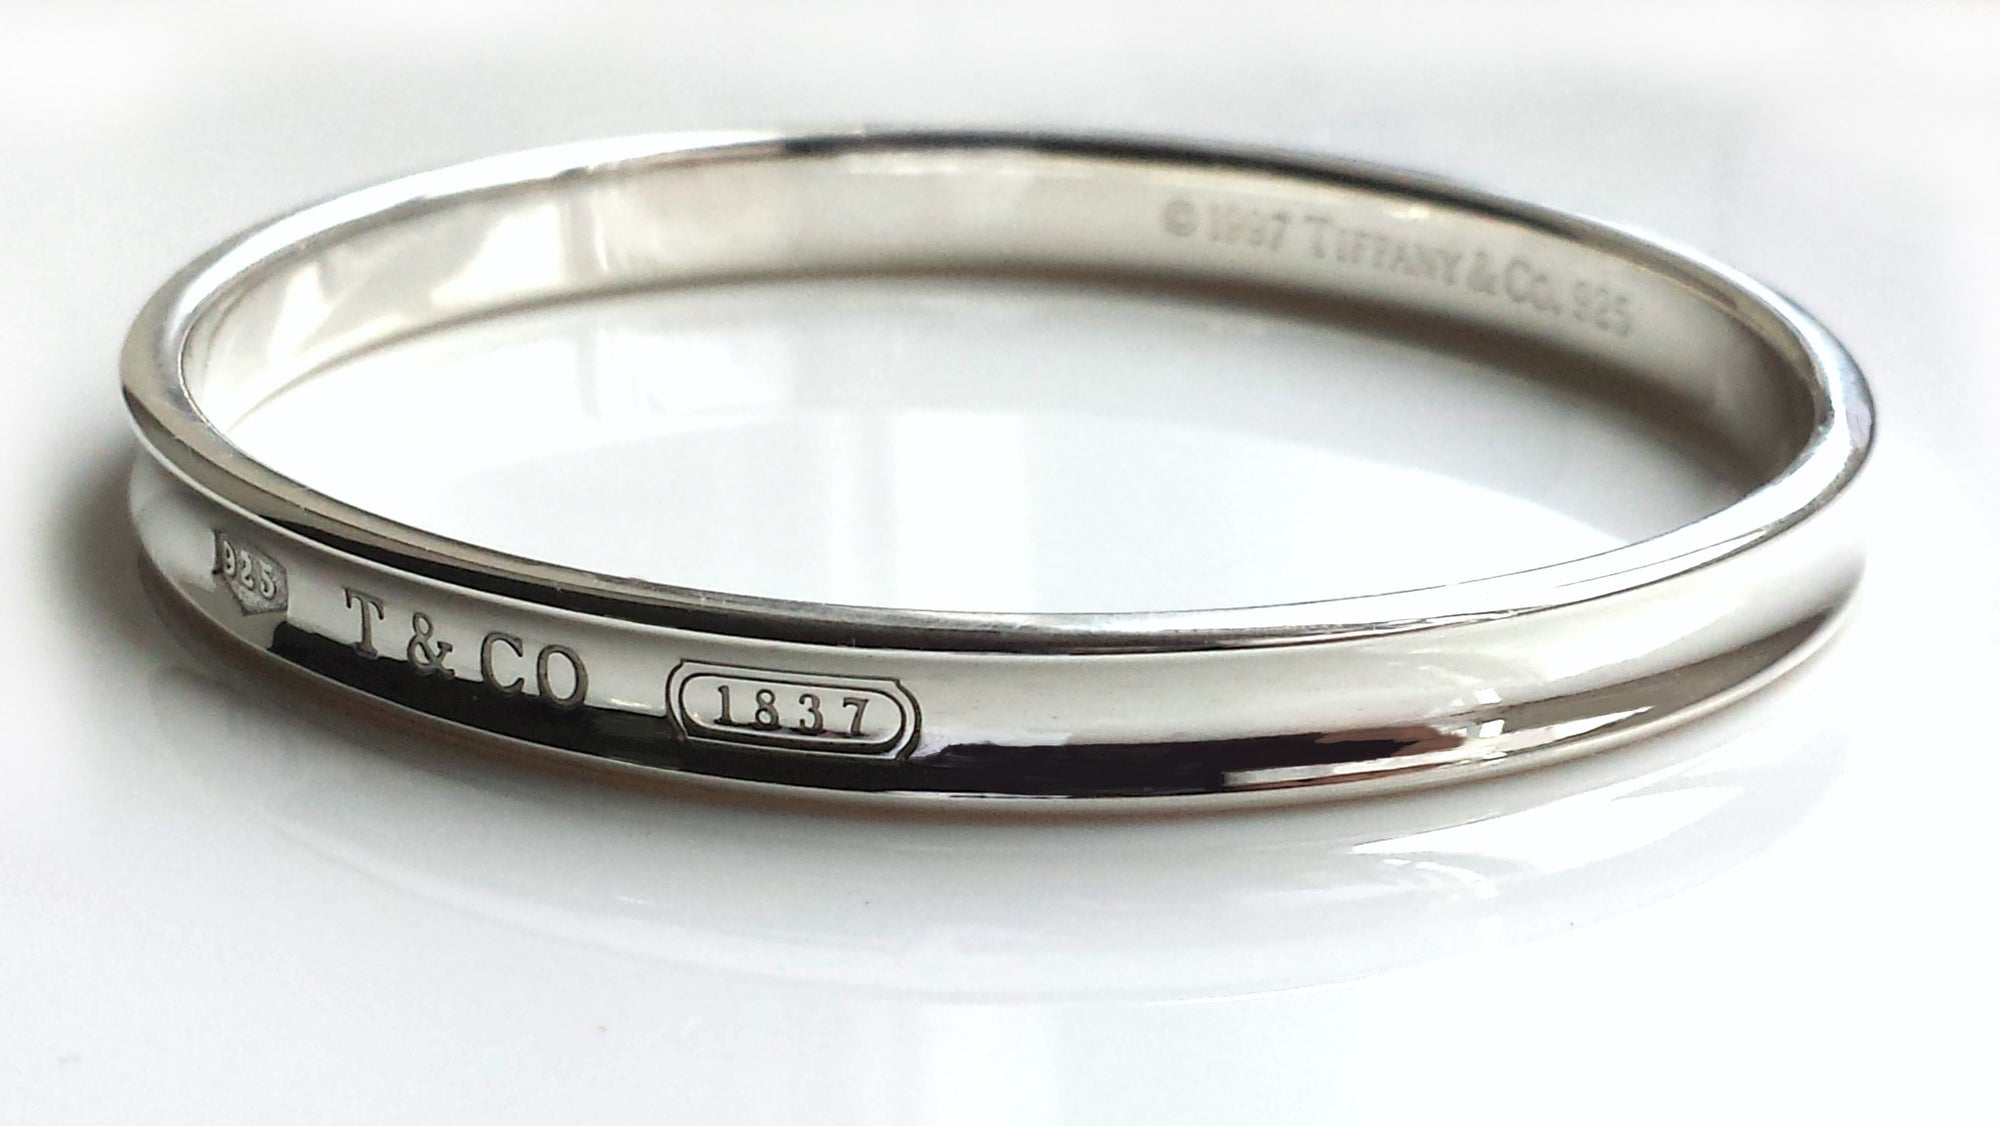 Tiffany & Co 1837 Sterling Silver Oval Bangle 7mm re-polished 7.87" (20cm)